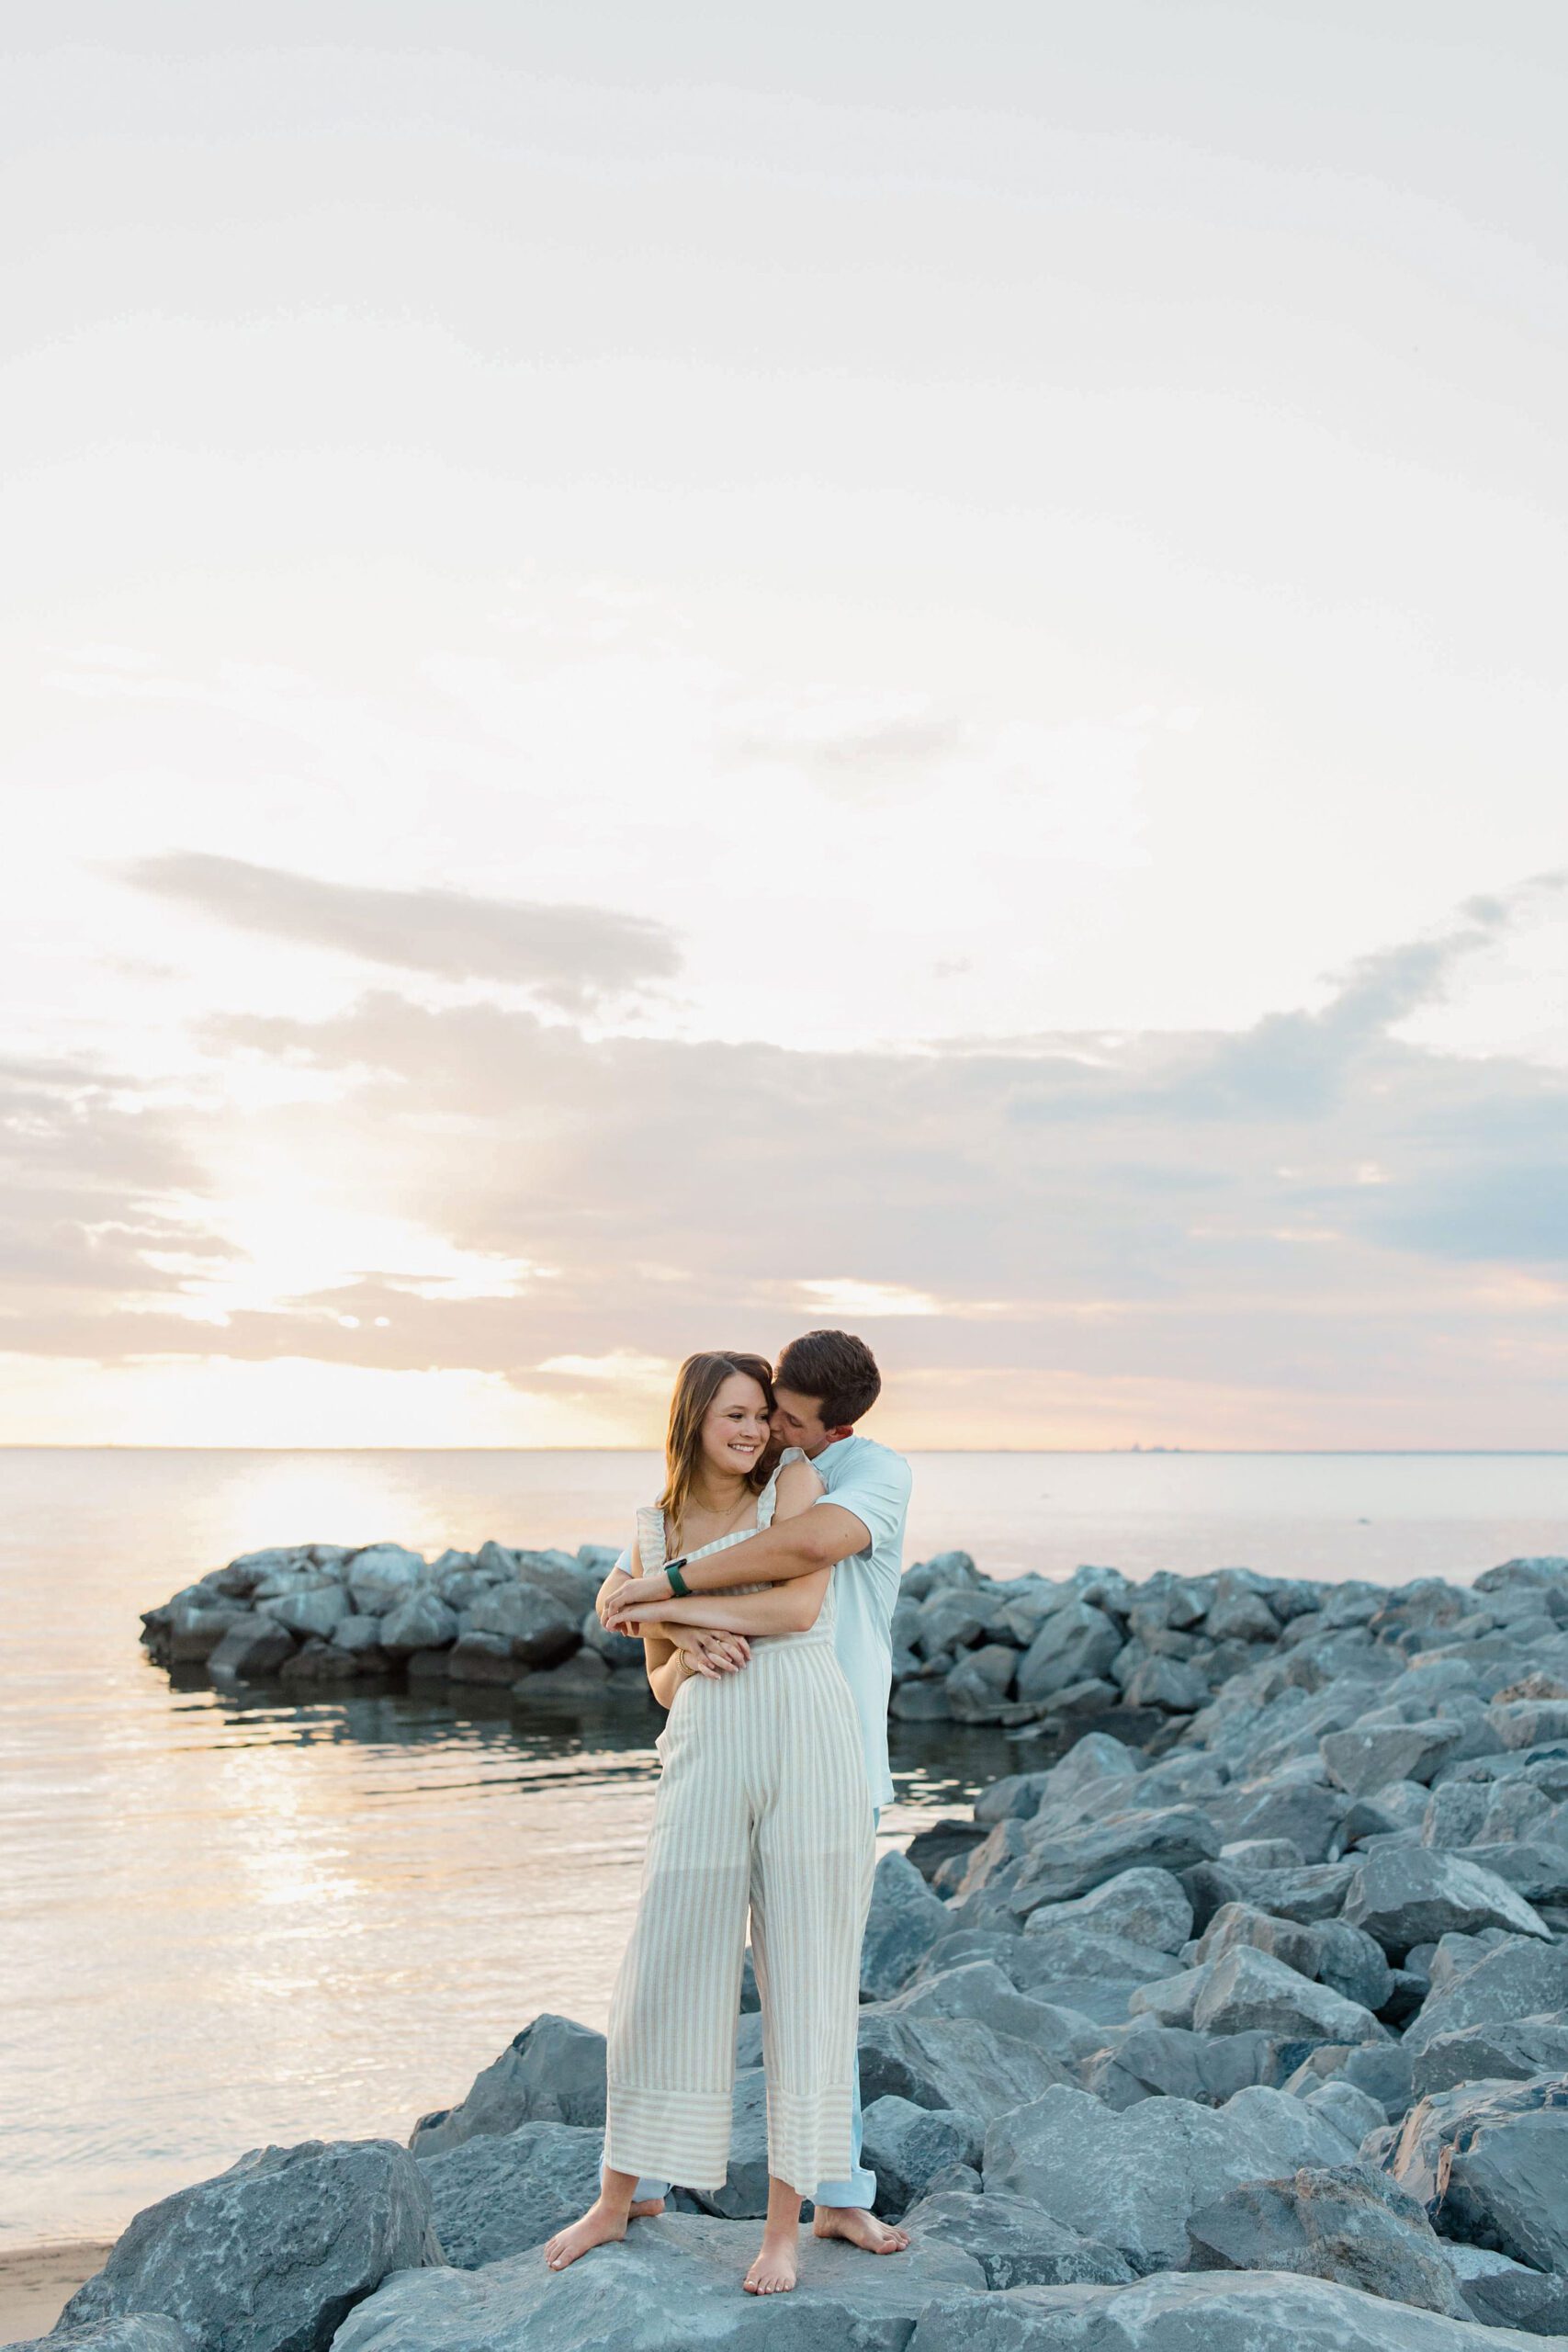 Modern engagement photos at the Grand Hotel at Point Clear, Alabama.